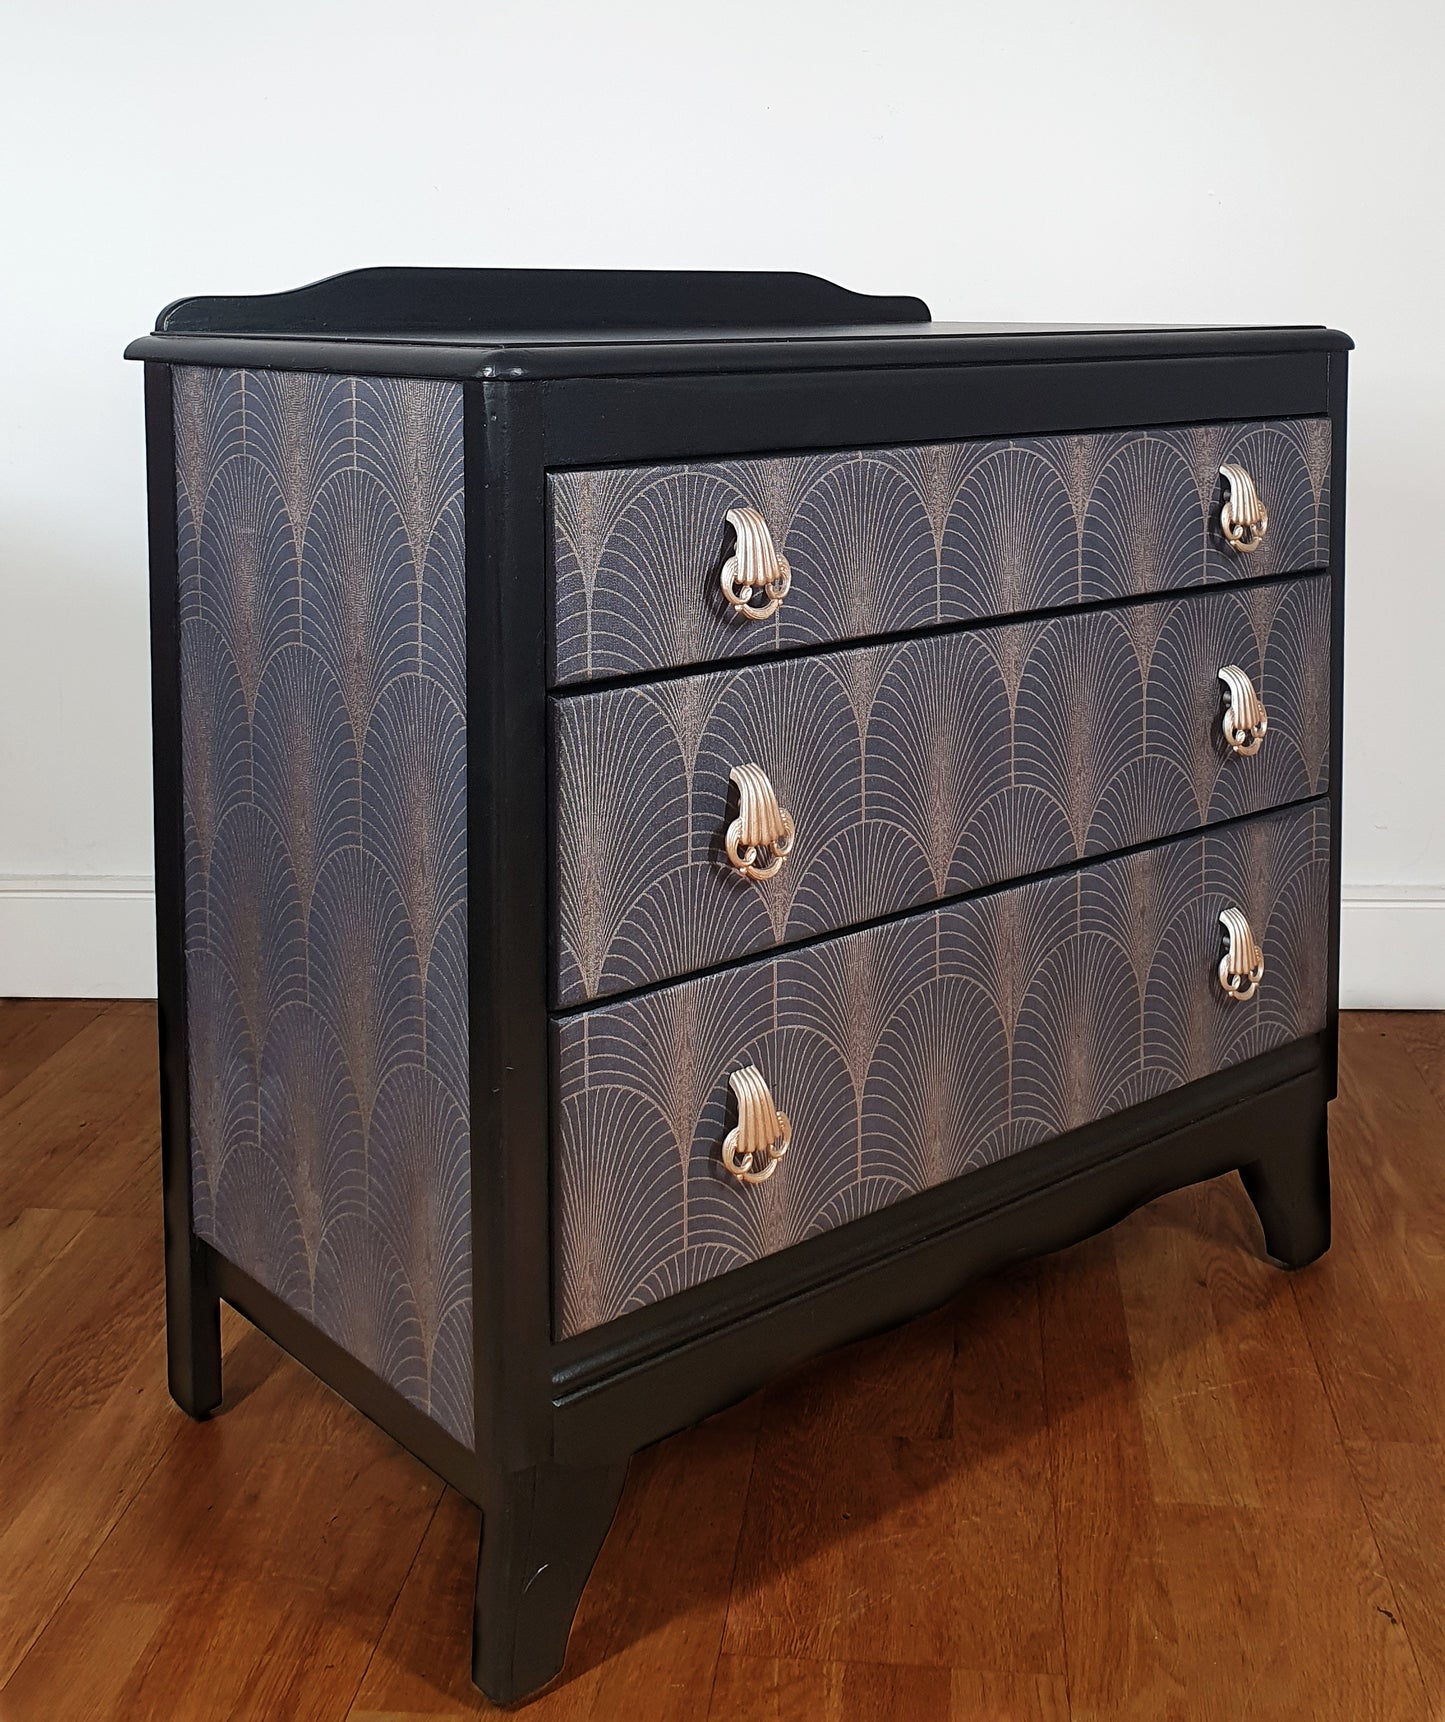 Art Deco style upcycled vintage Chest of Drawers